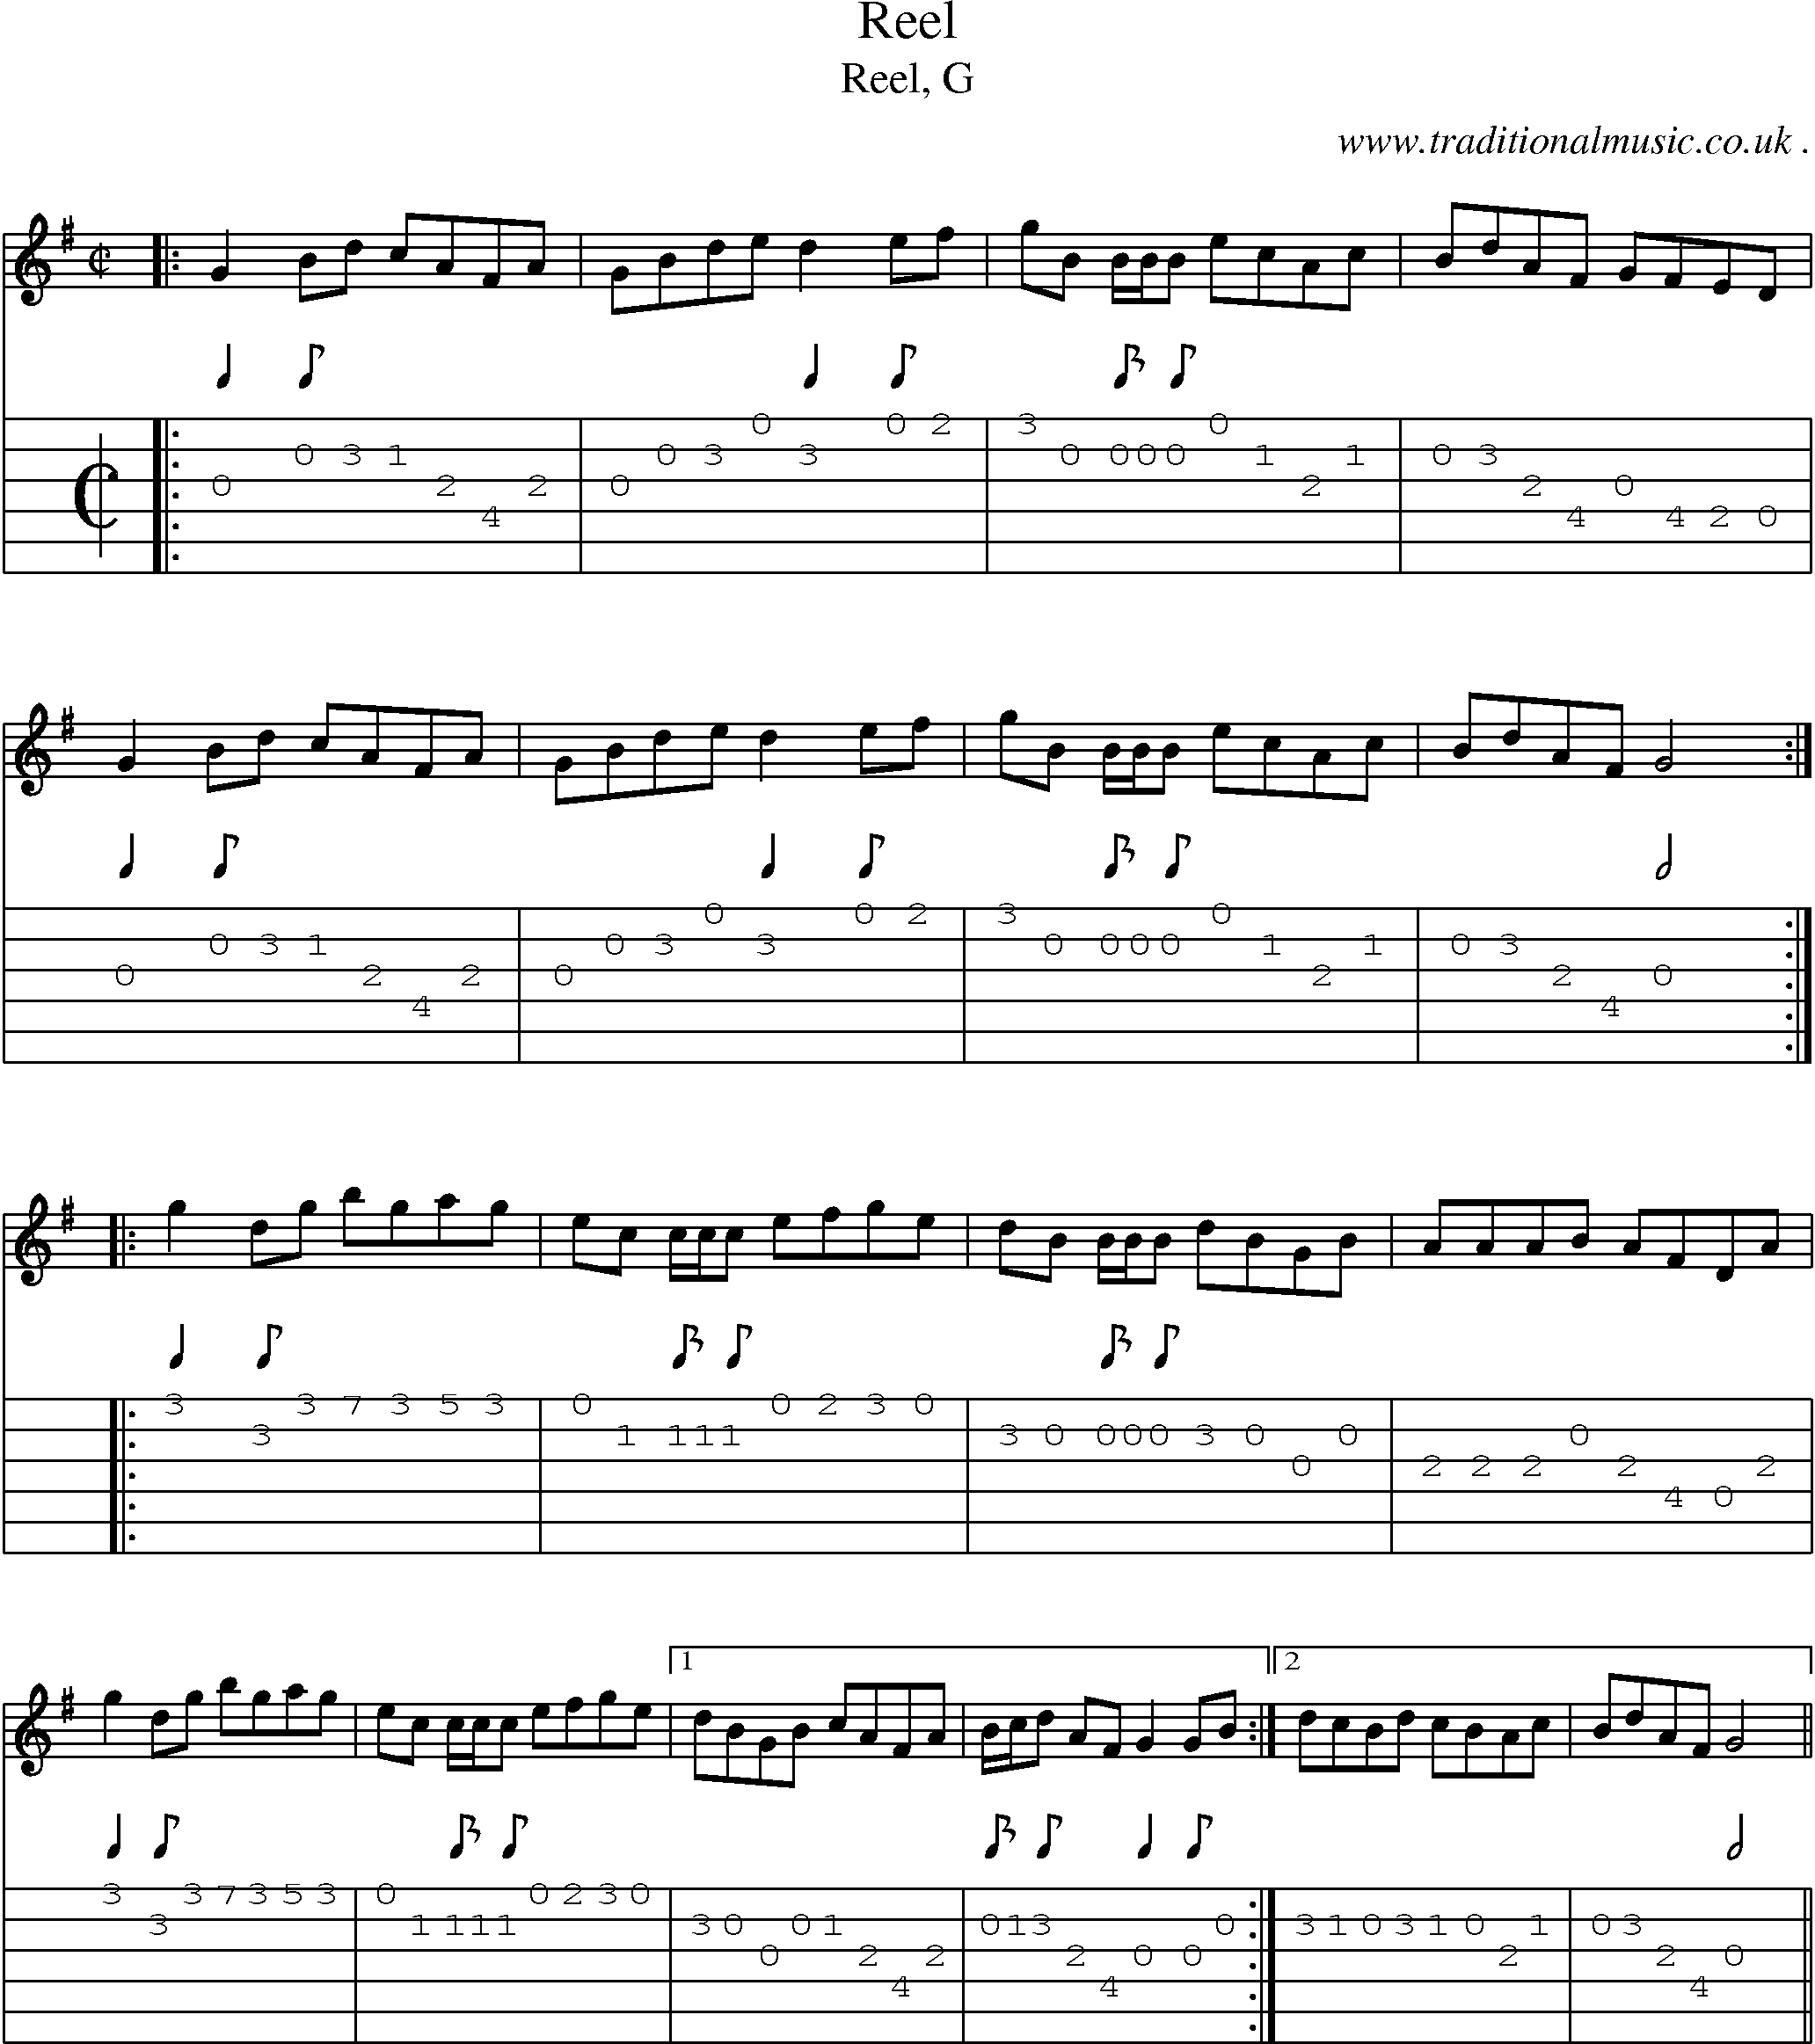 Sheet-music  score, Chords and Guitar Tabs for Reel